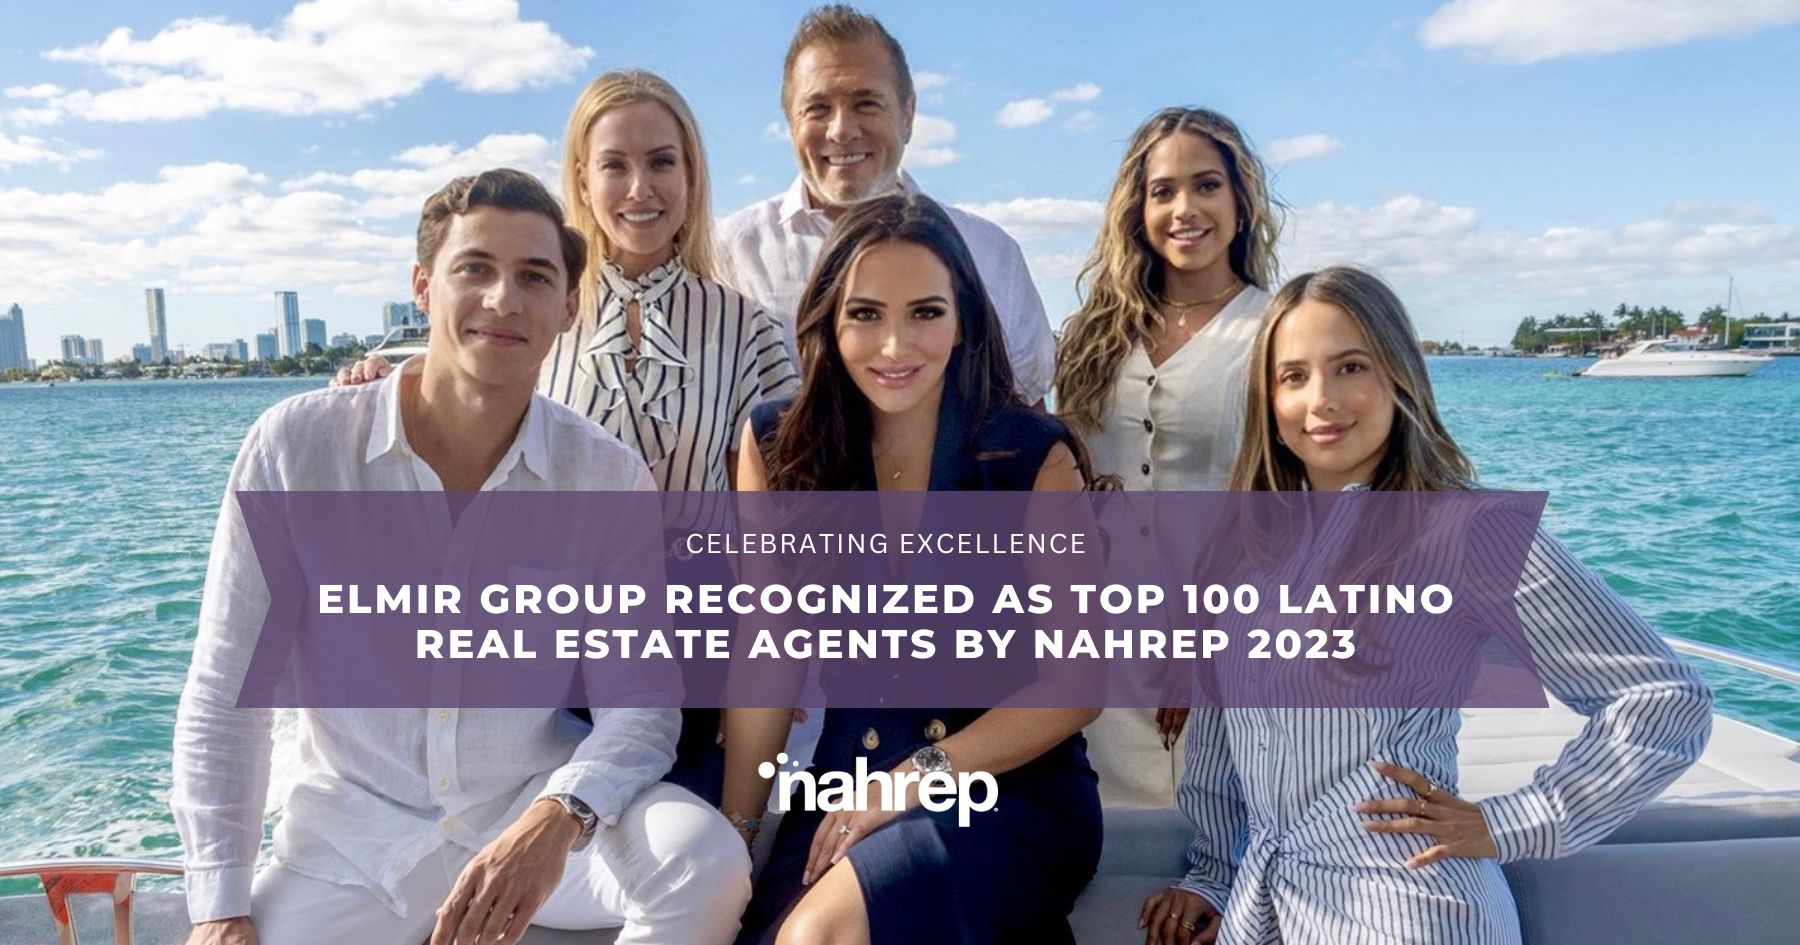 Elmir Group Recognized as Top 100 Latino Real Estate Agents by NAHREP 2023